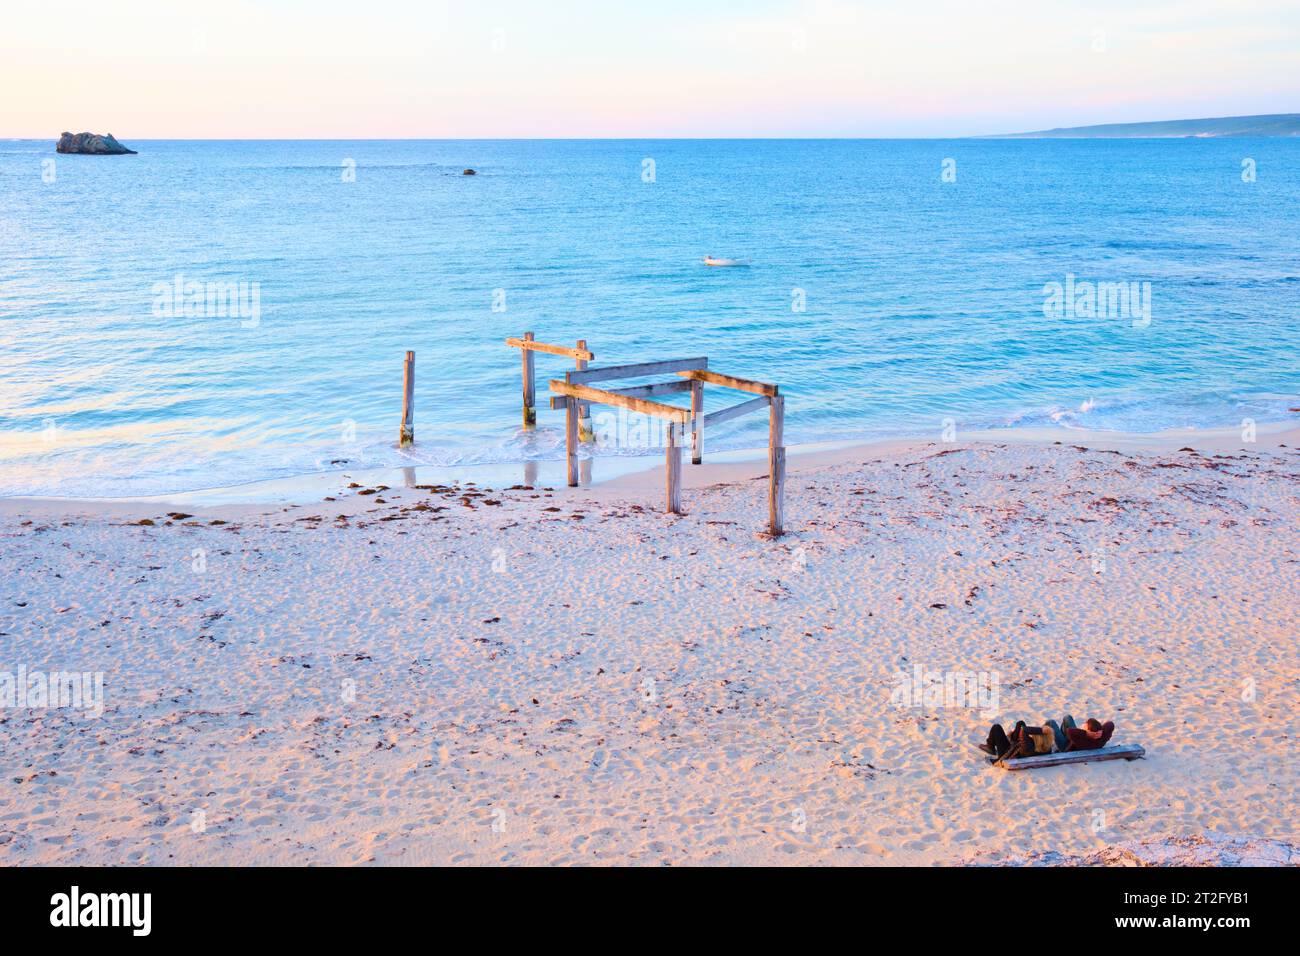 Remains of the old jetty and two people watching the sunset at Hamelin Bay in the south-west region of Western Australia. Stock Photo